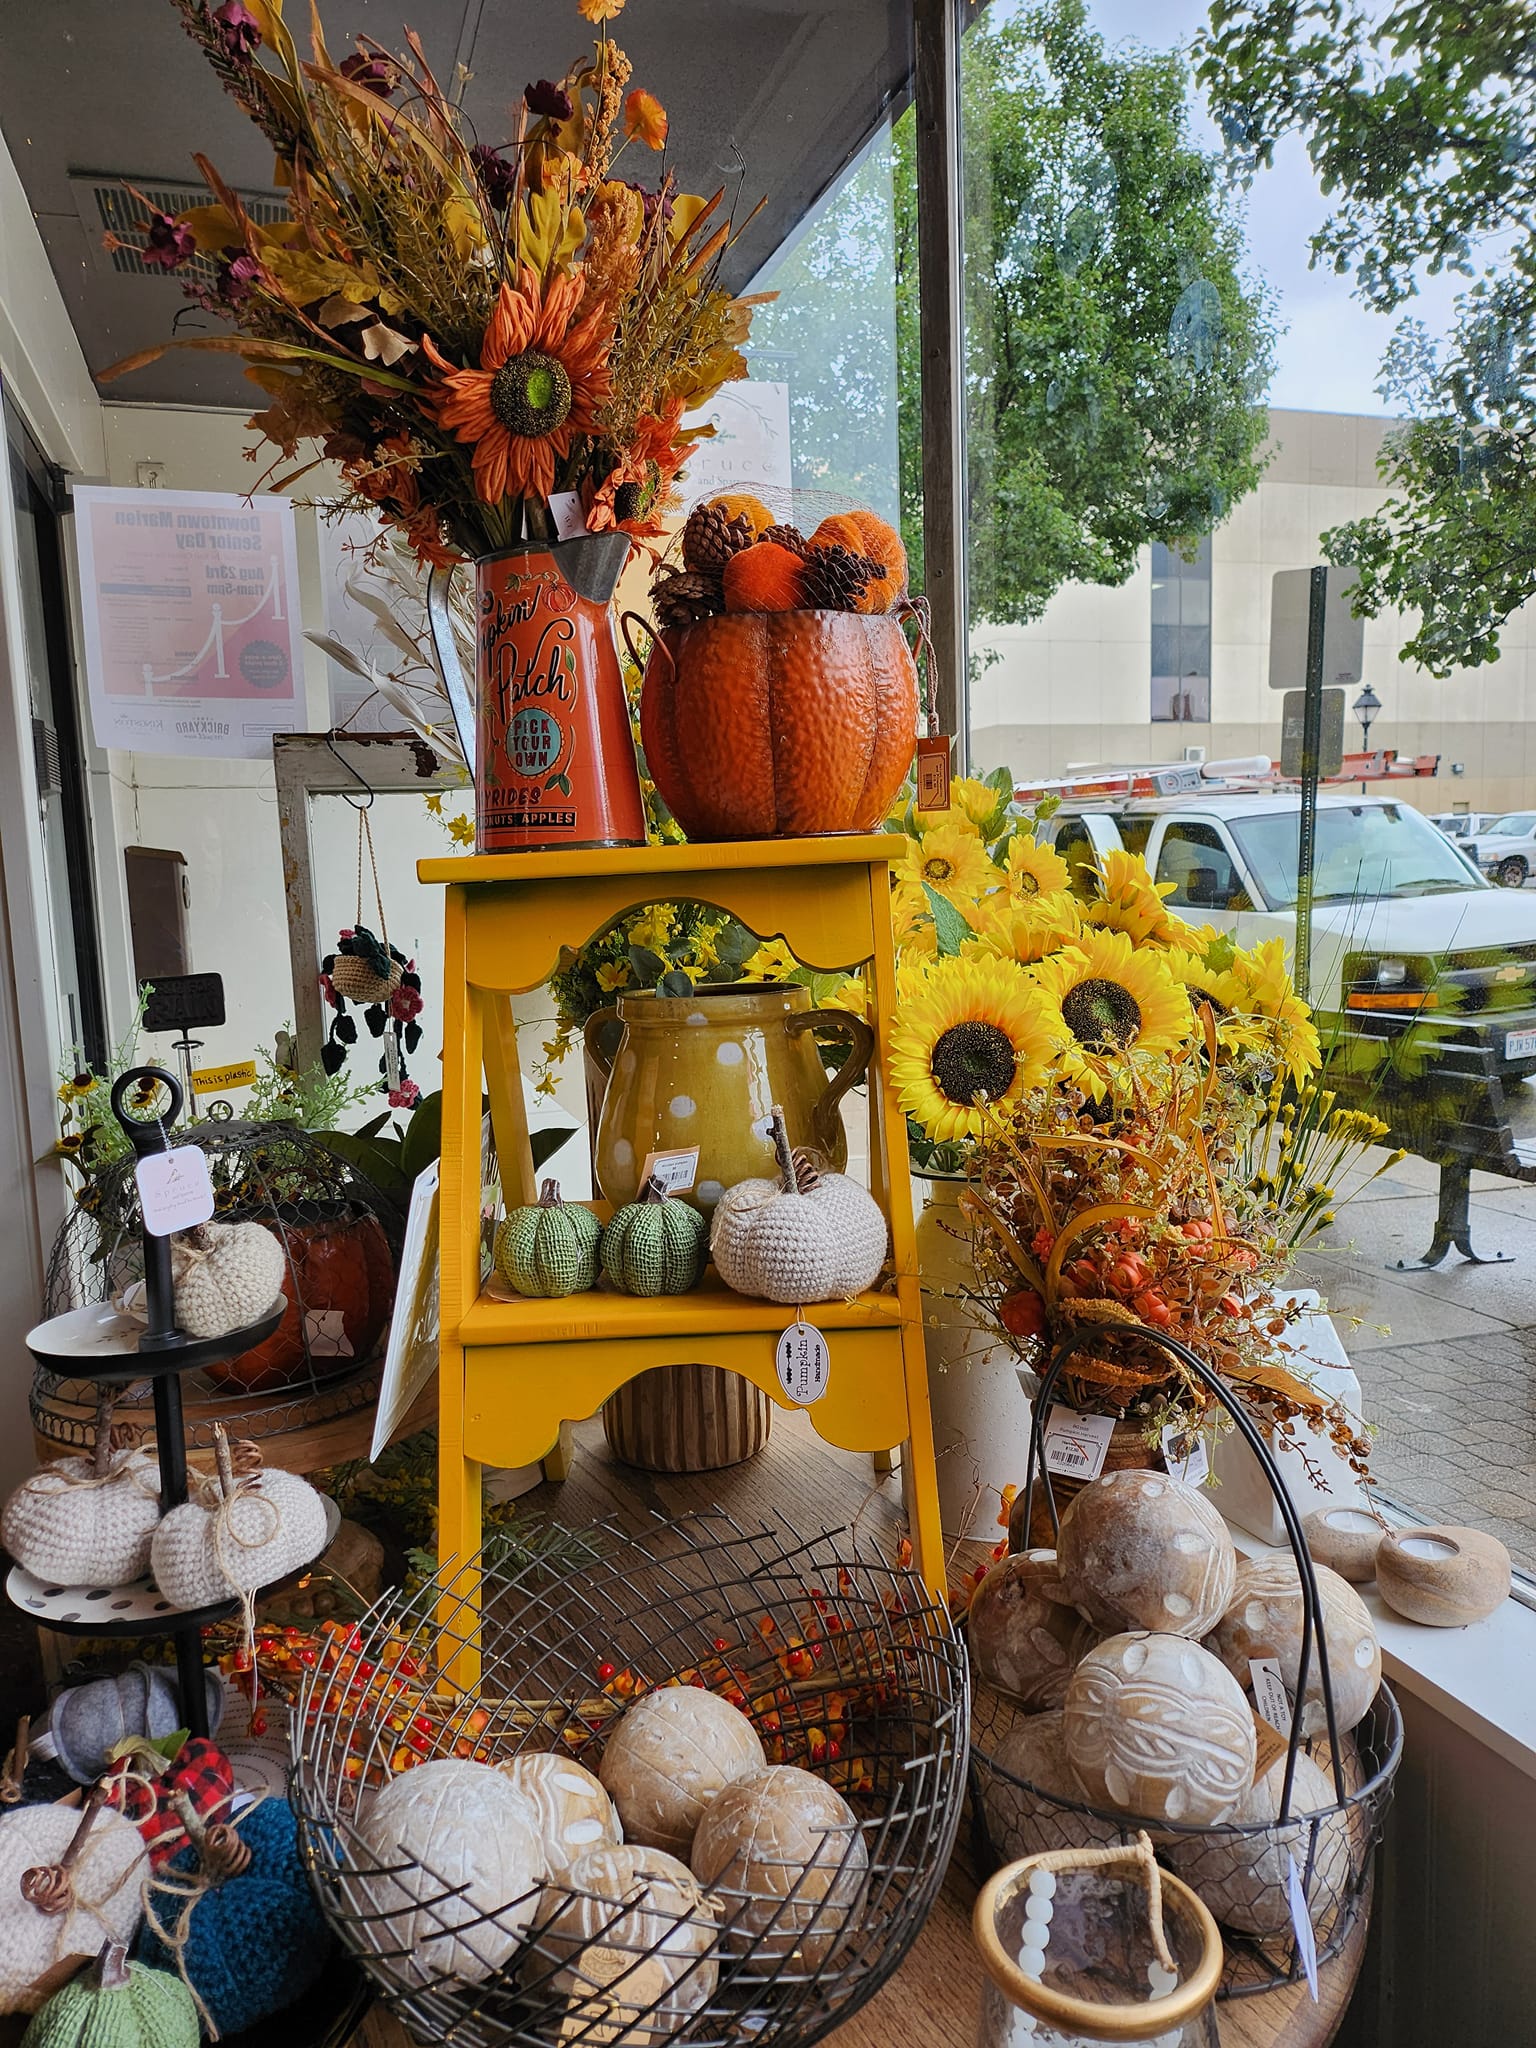 Pictures the store's front window with decorative pumpkins and floral stems